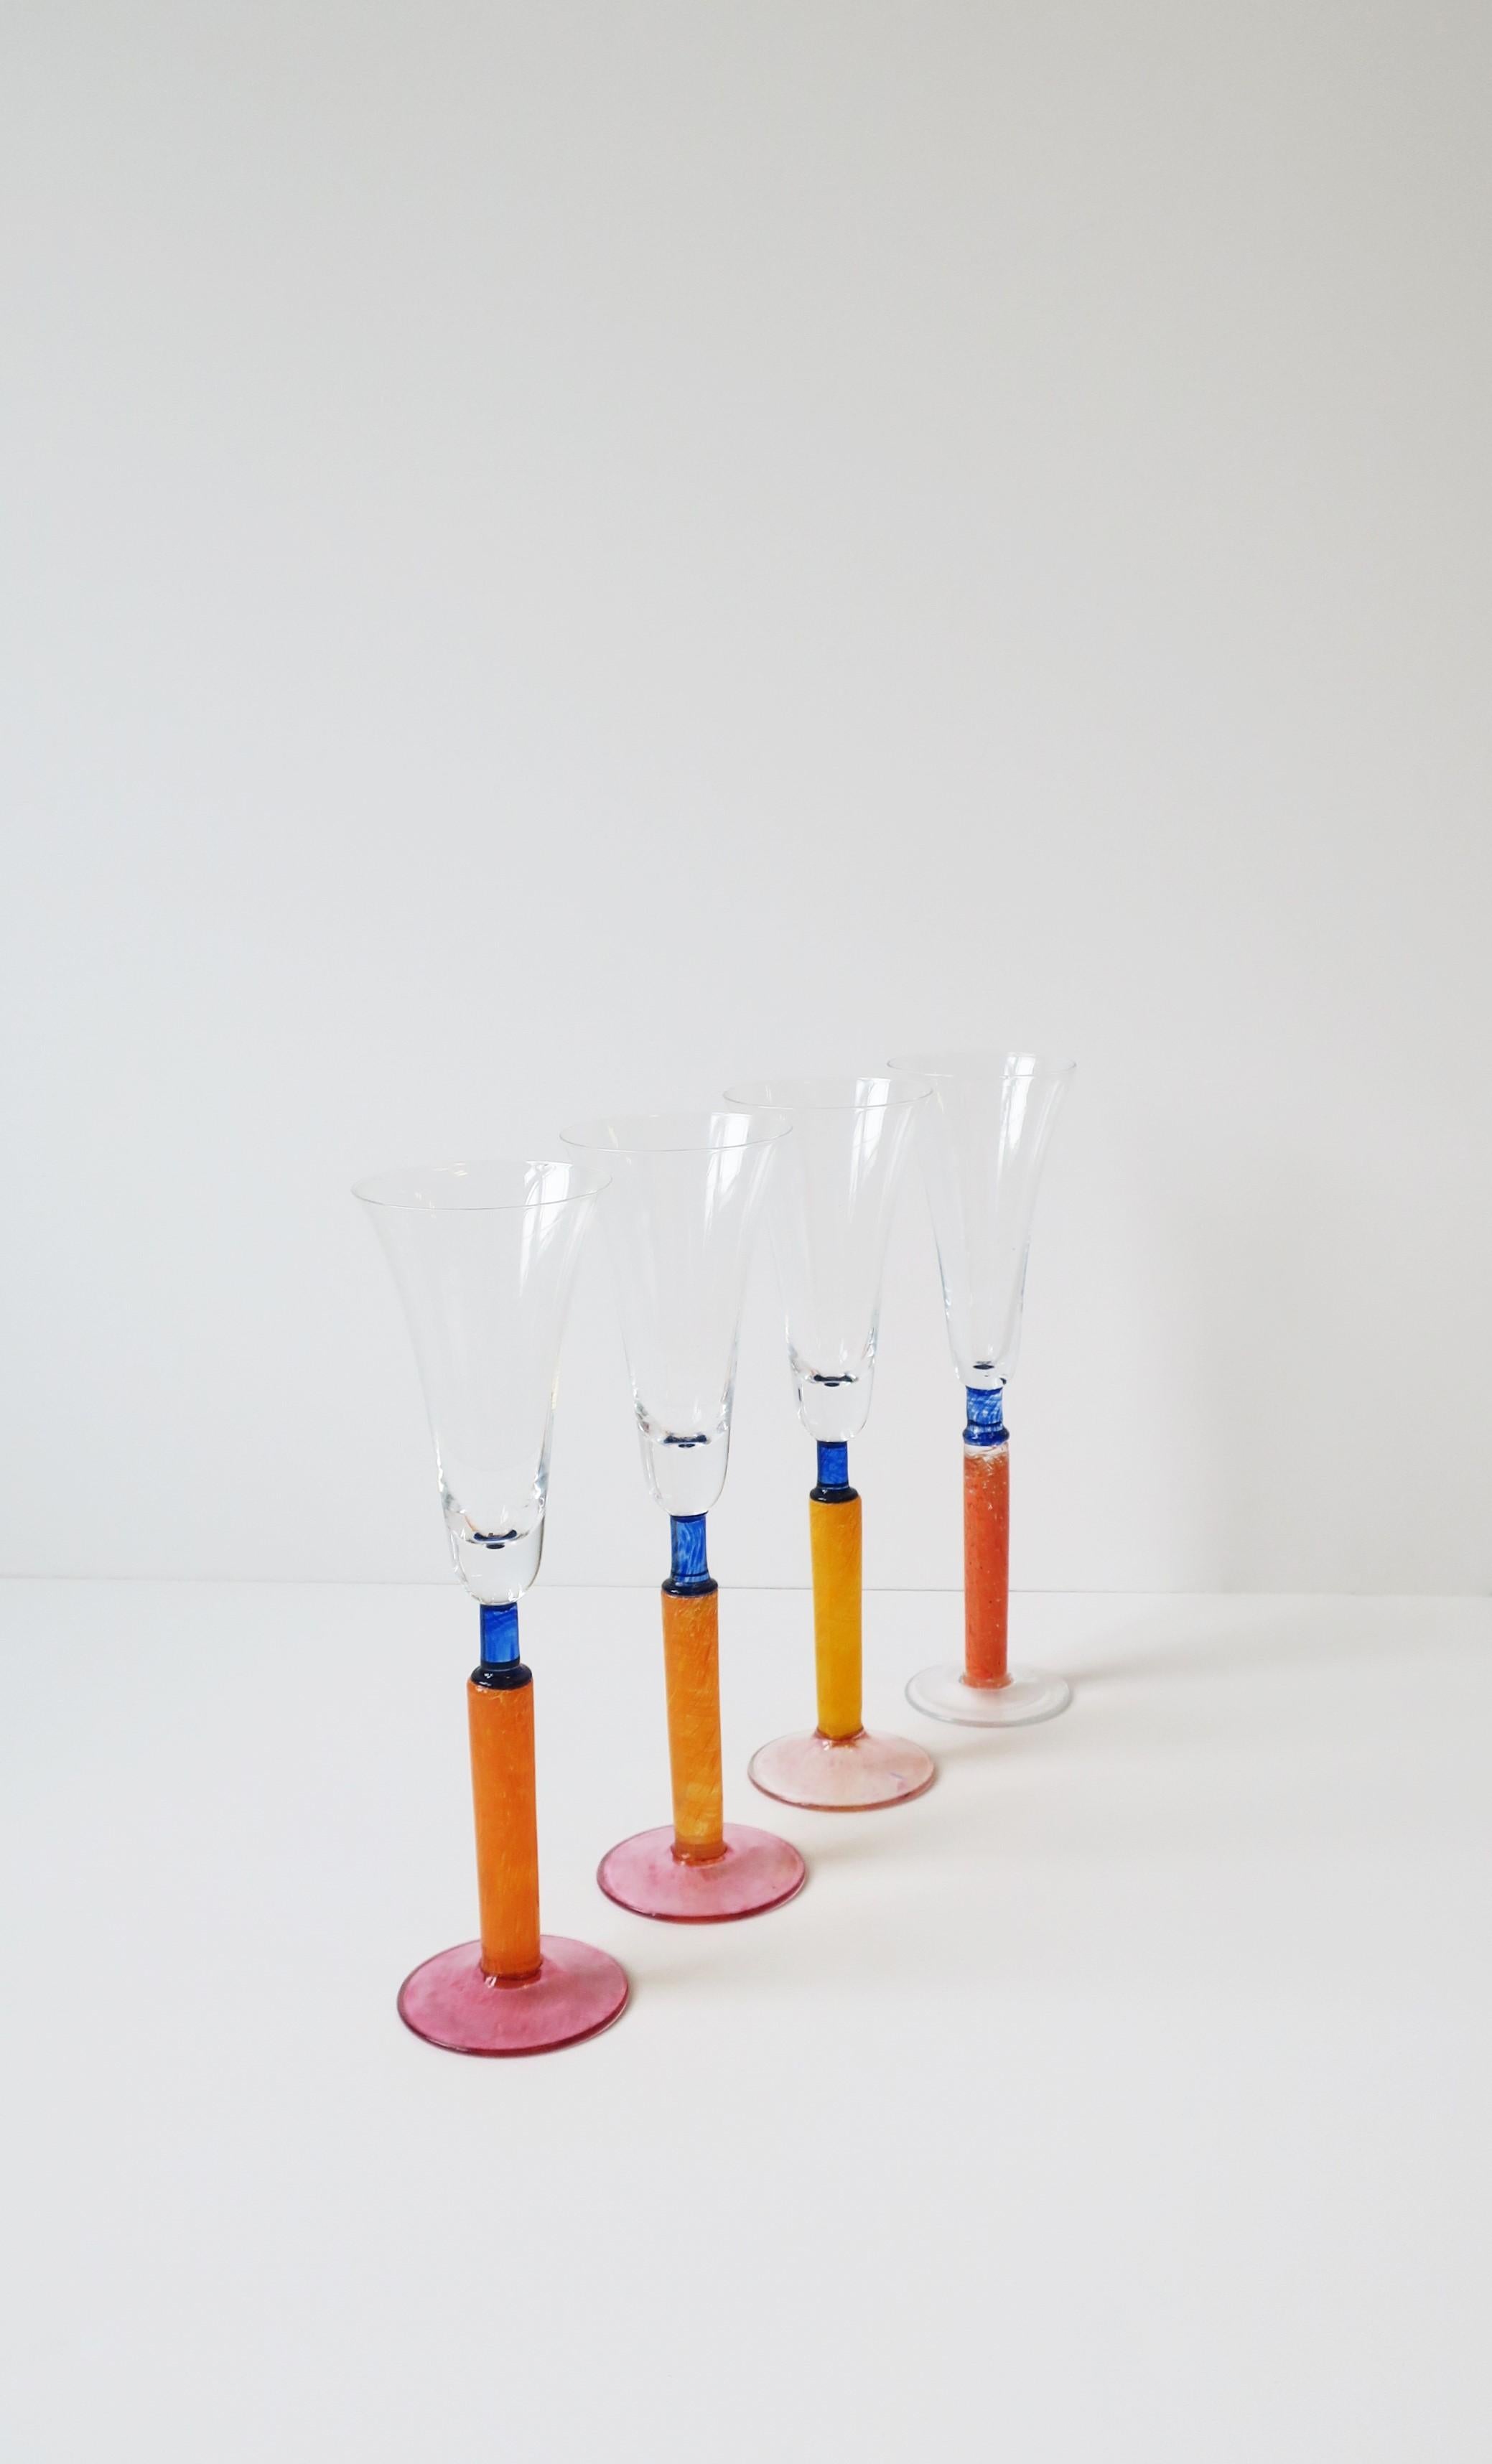 A beautiful set of four (4) Postmodern orange art glass Champagne flute glasses, circa 1990s, Europe. In the style of Kosta Boda, Sweden. Colors include orange, pink, and blue. A beautiful set for home, summer, holiday entertaining, and for any bar,